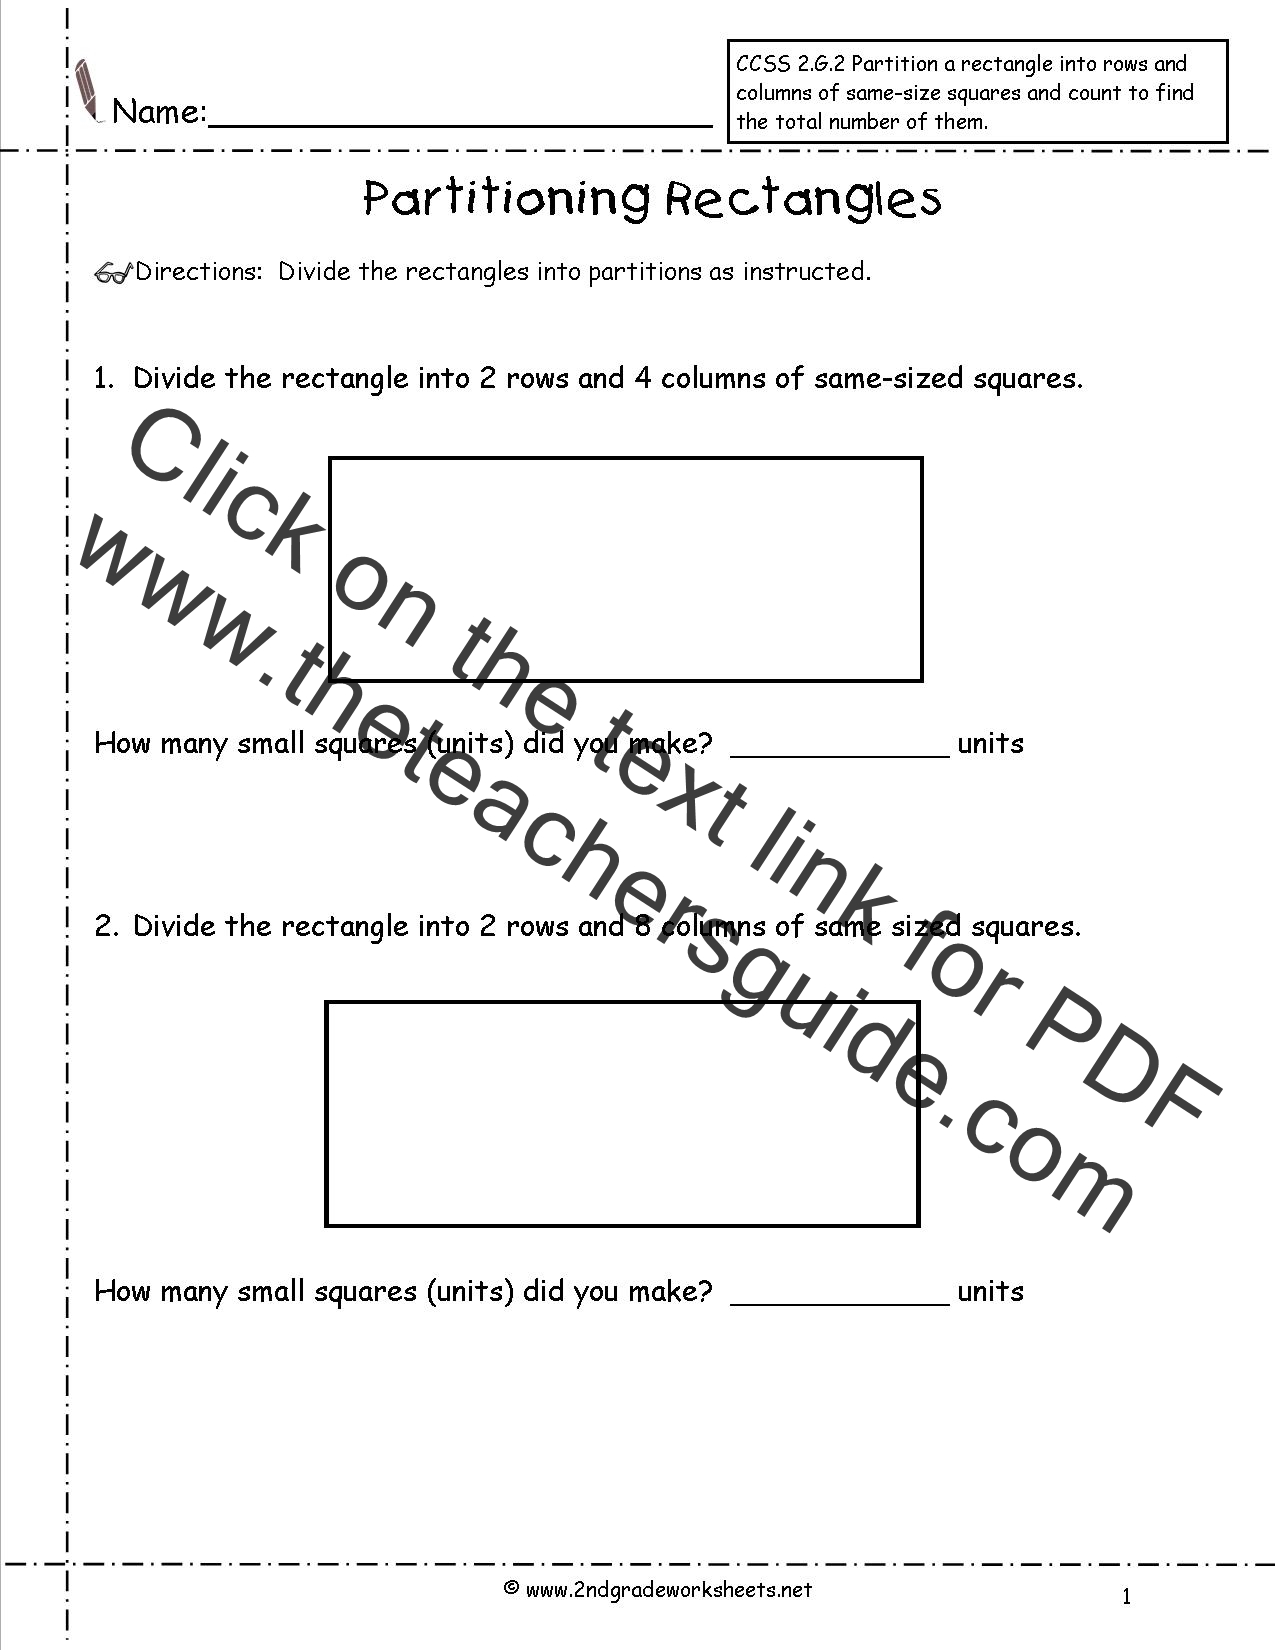 partition-rectangles-worksheets-ccss-2-g-2